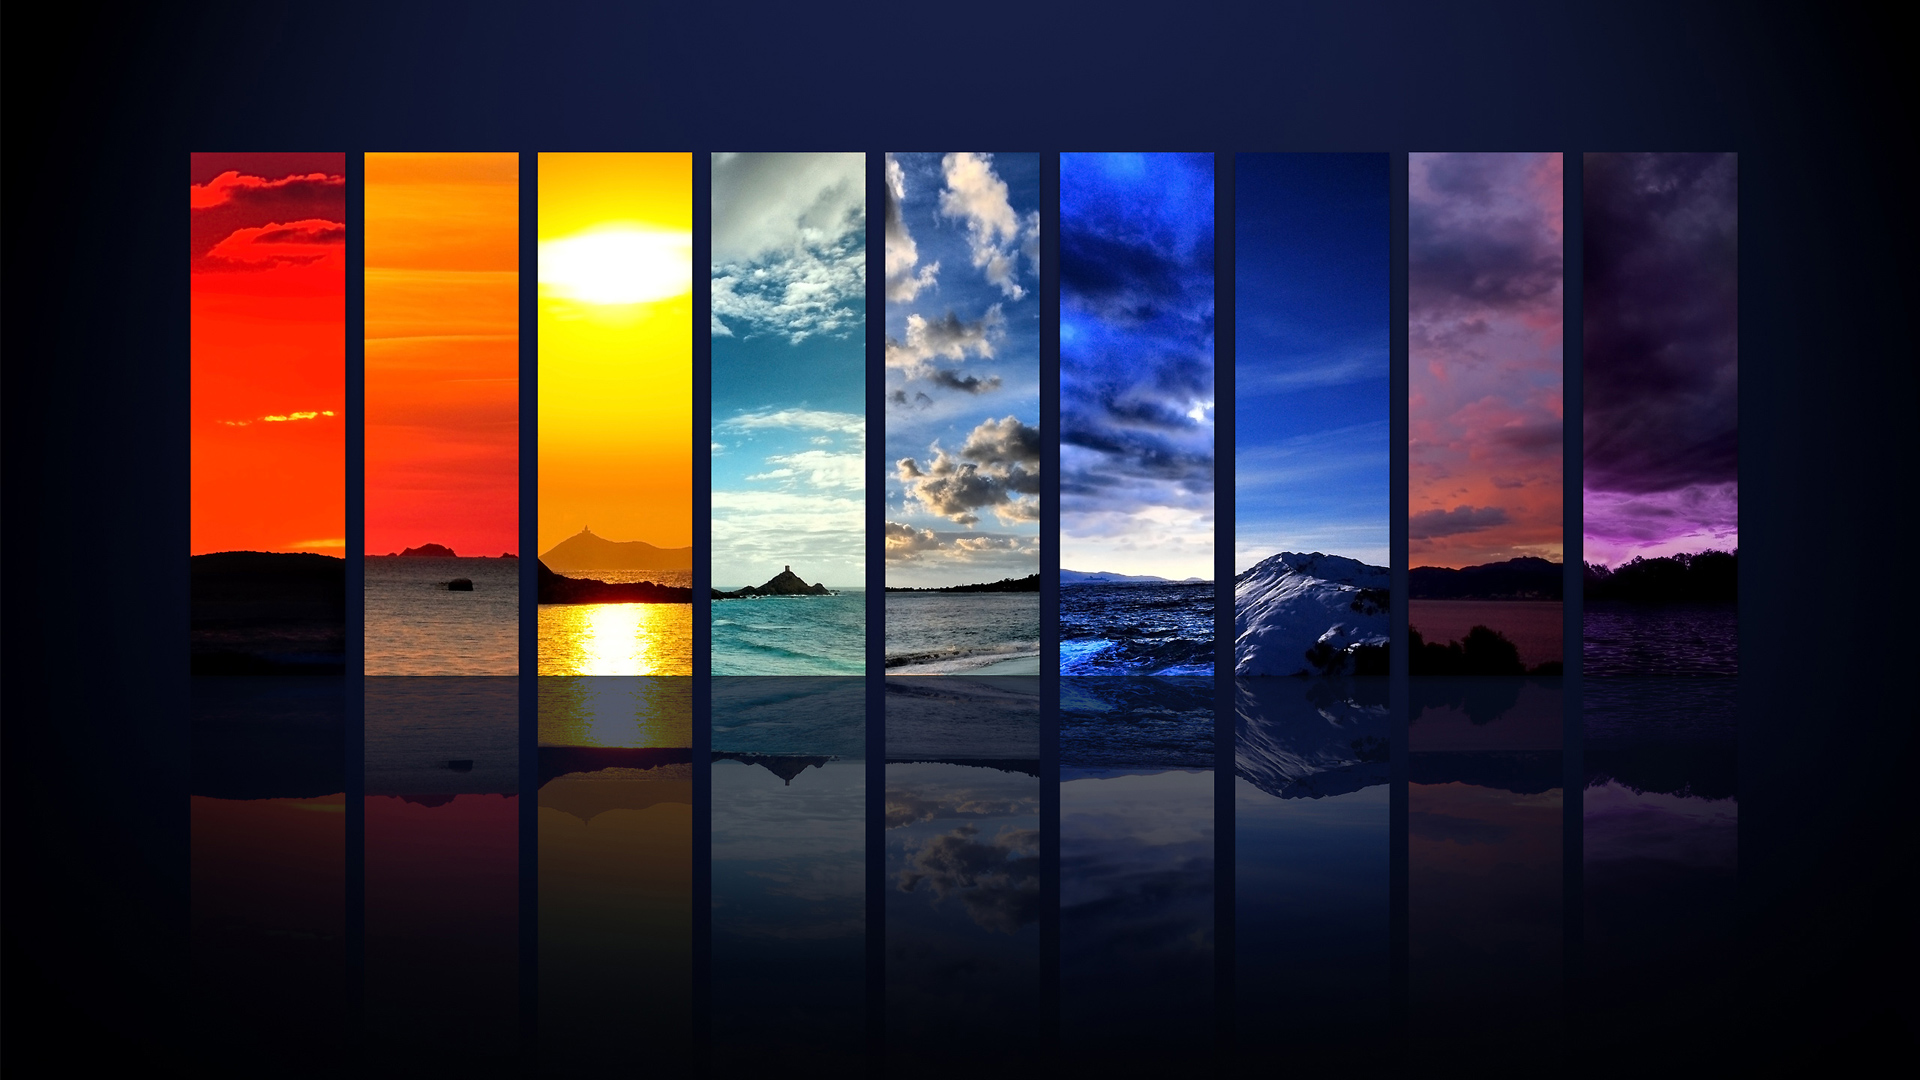 Hd Backgrounds 1080p Abstract